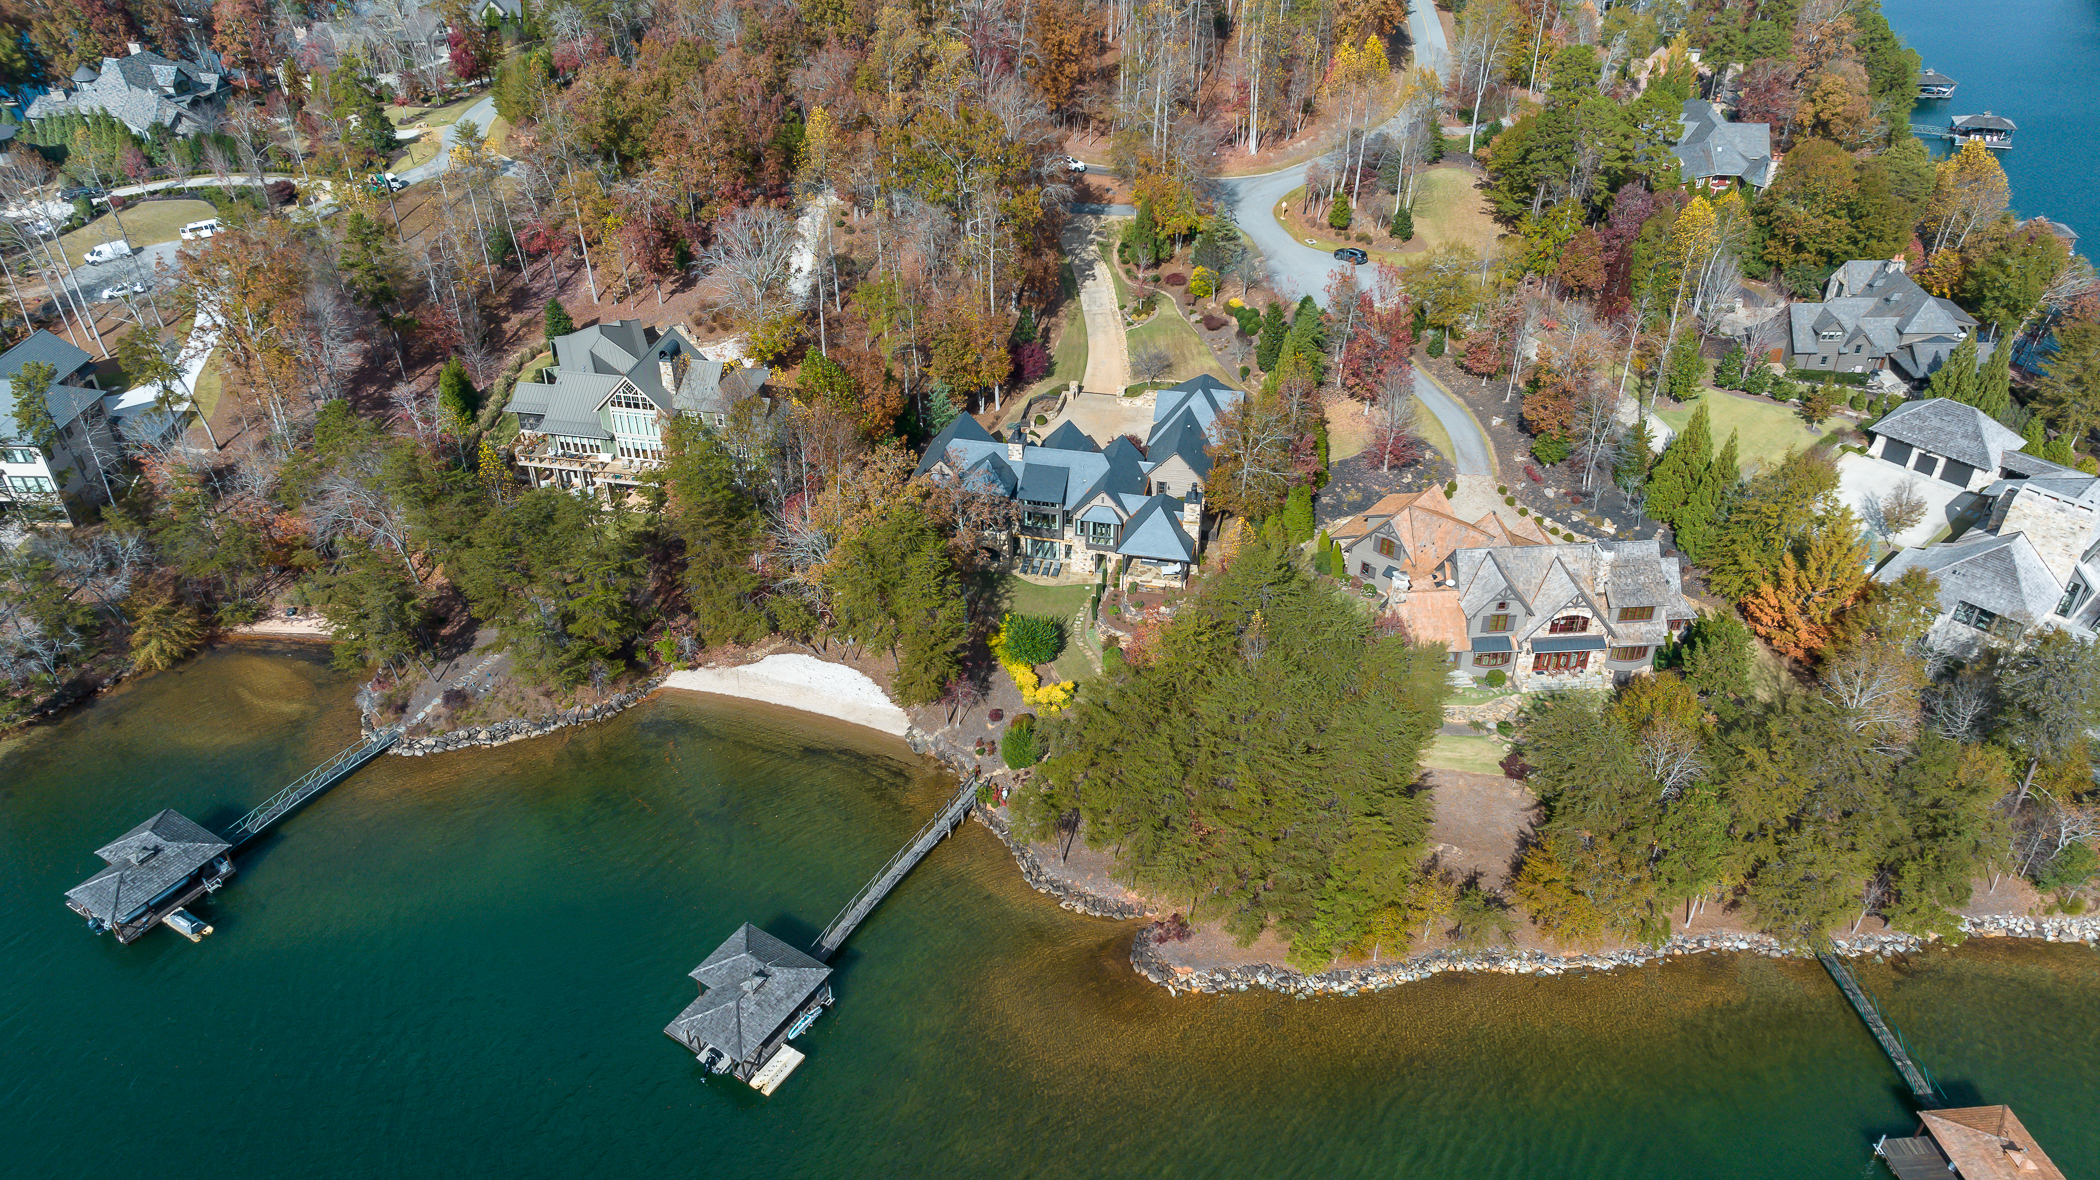 An overhead view of several big houses on lake Keowee.